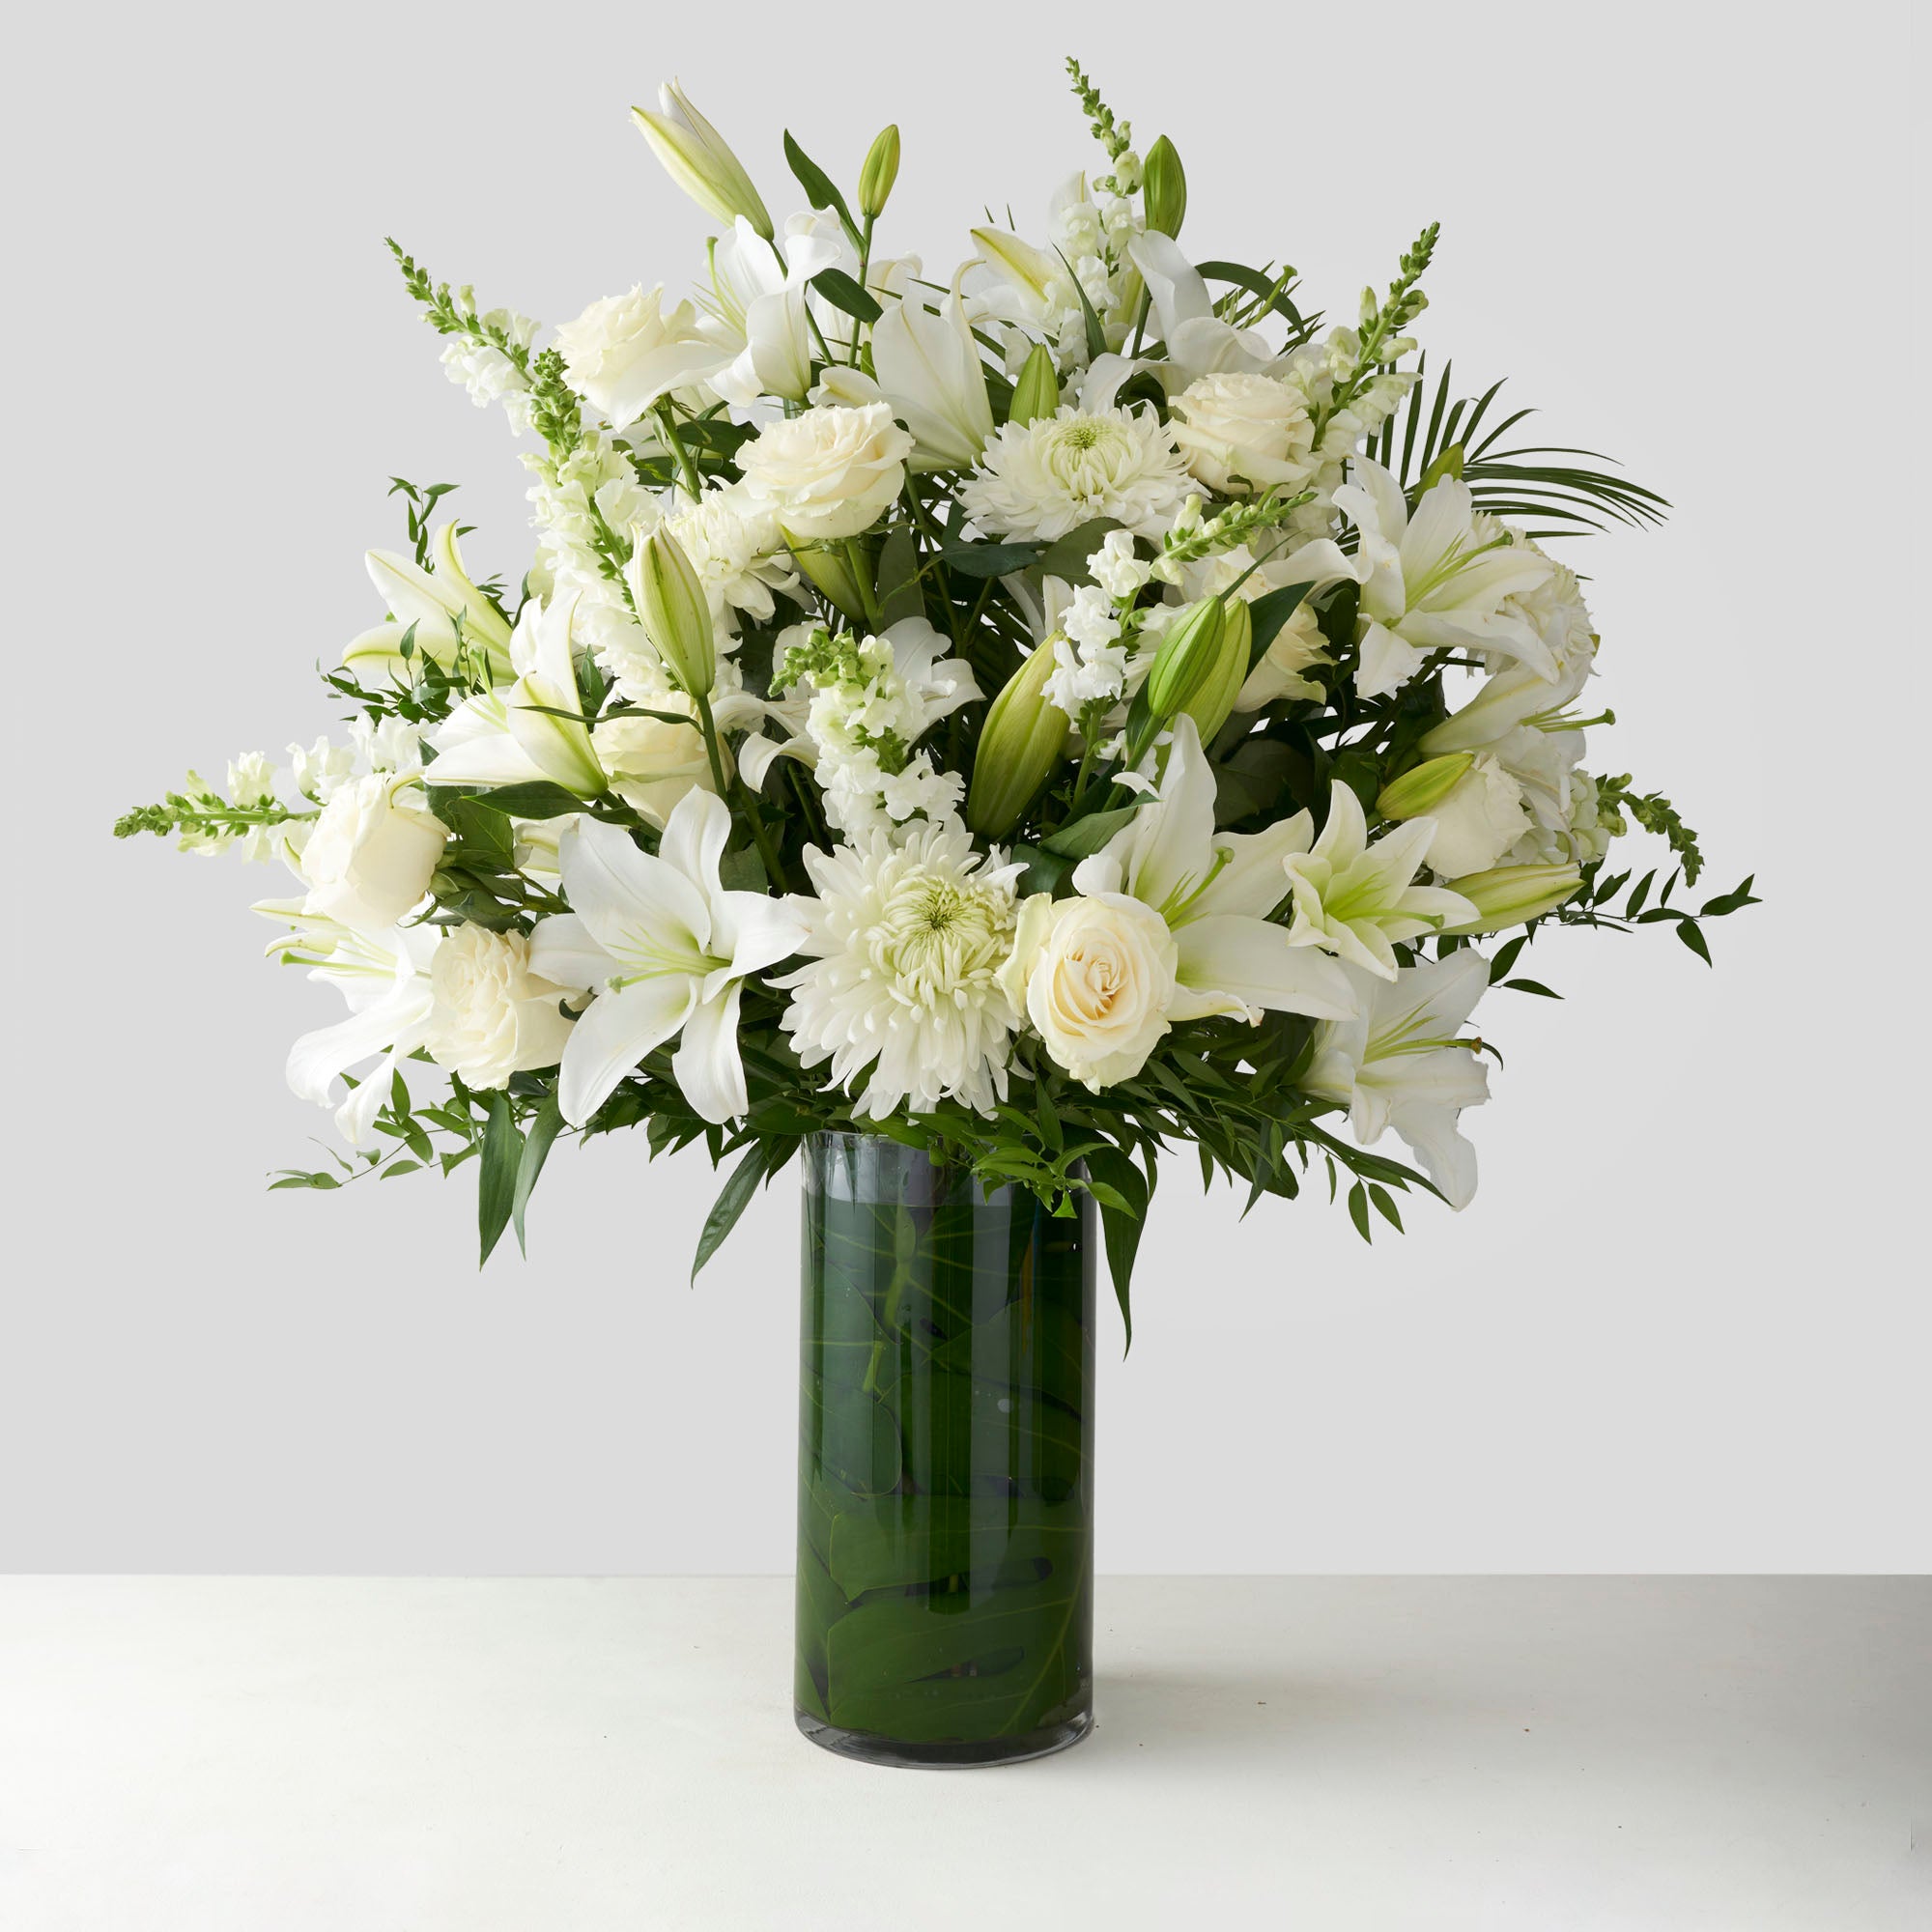 Large glass vase filled with white flowers.